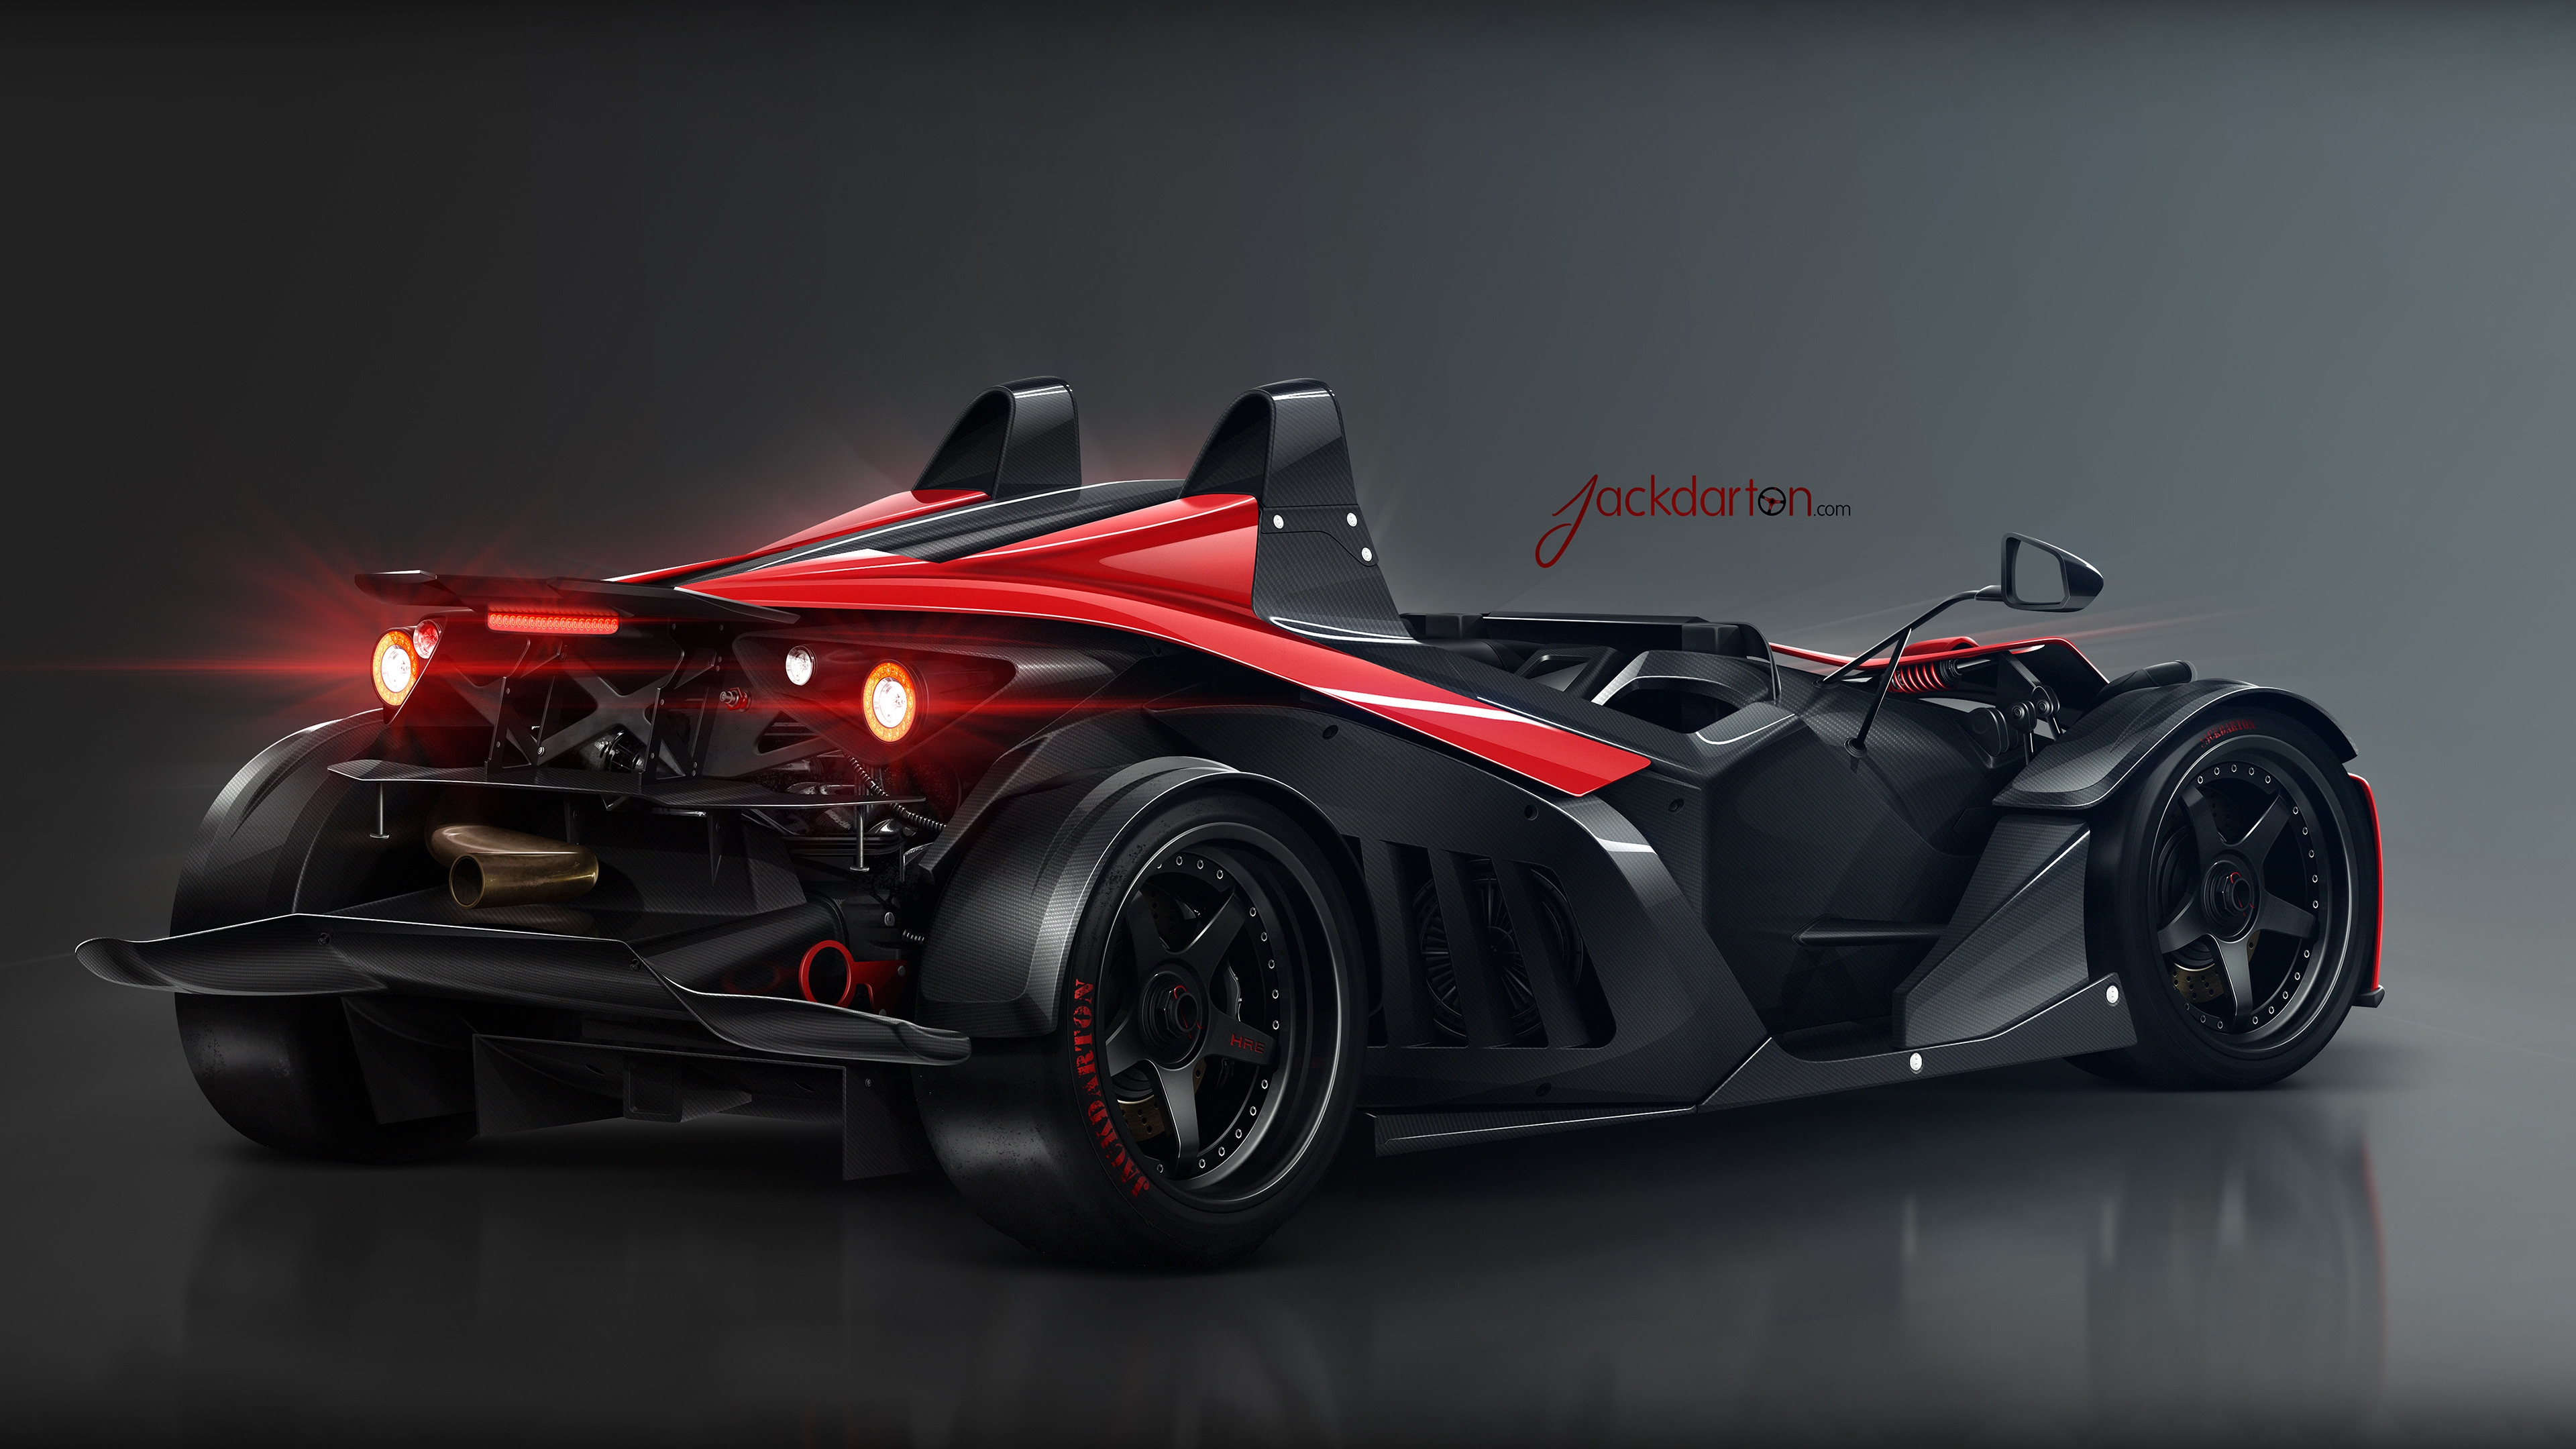 KTM X Bow for 3840 x 2160 Ultra HD resolution